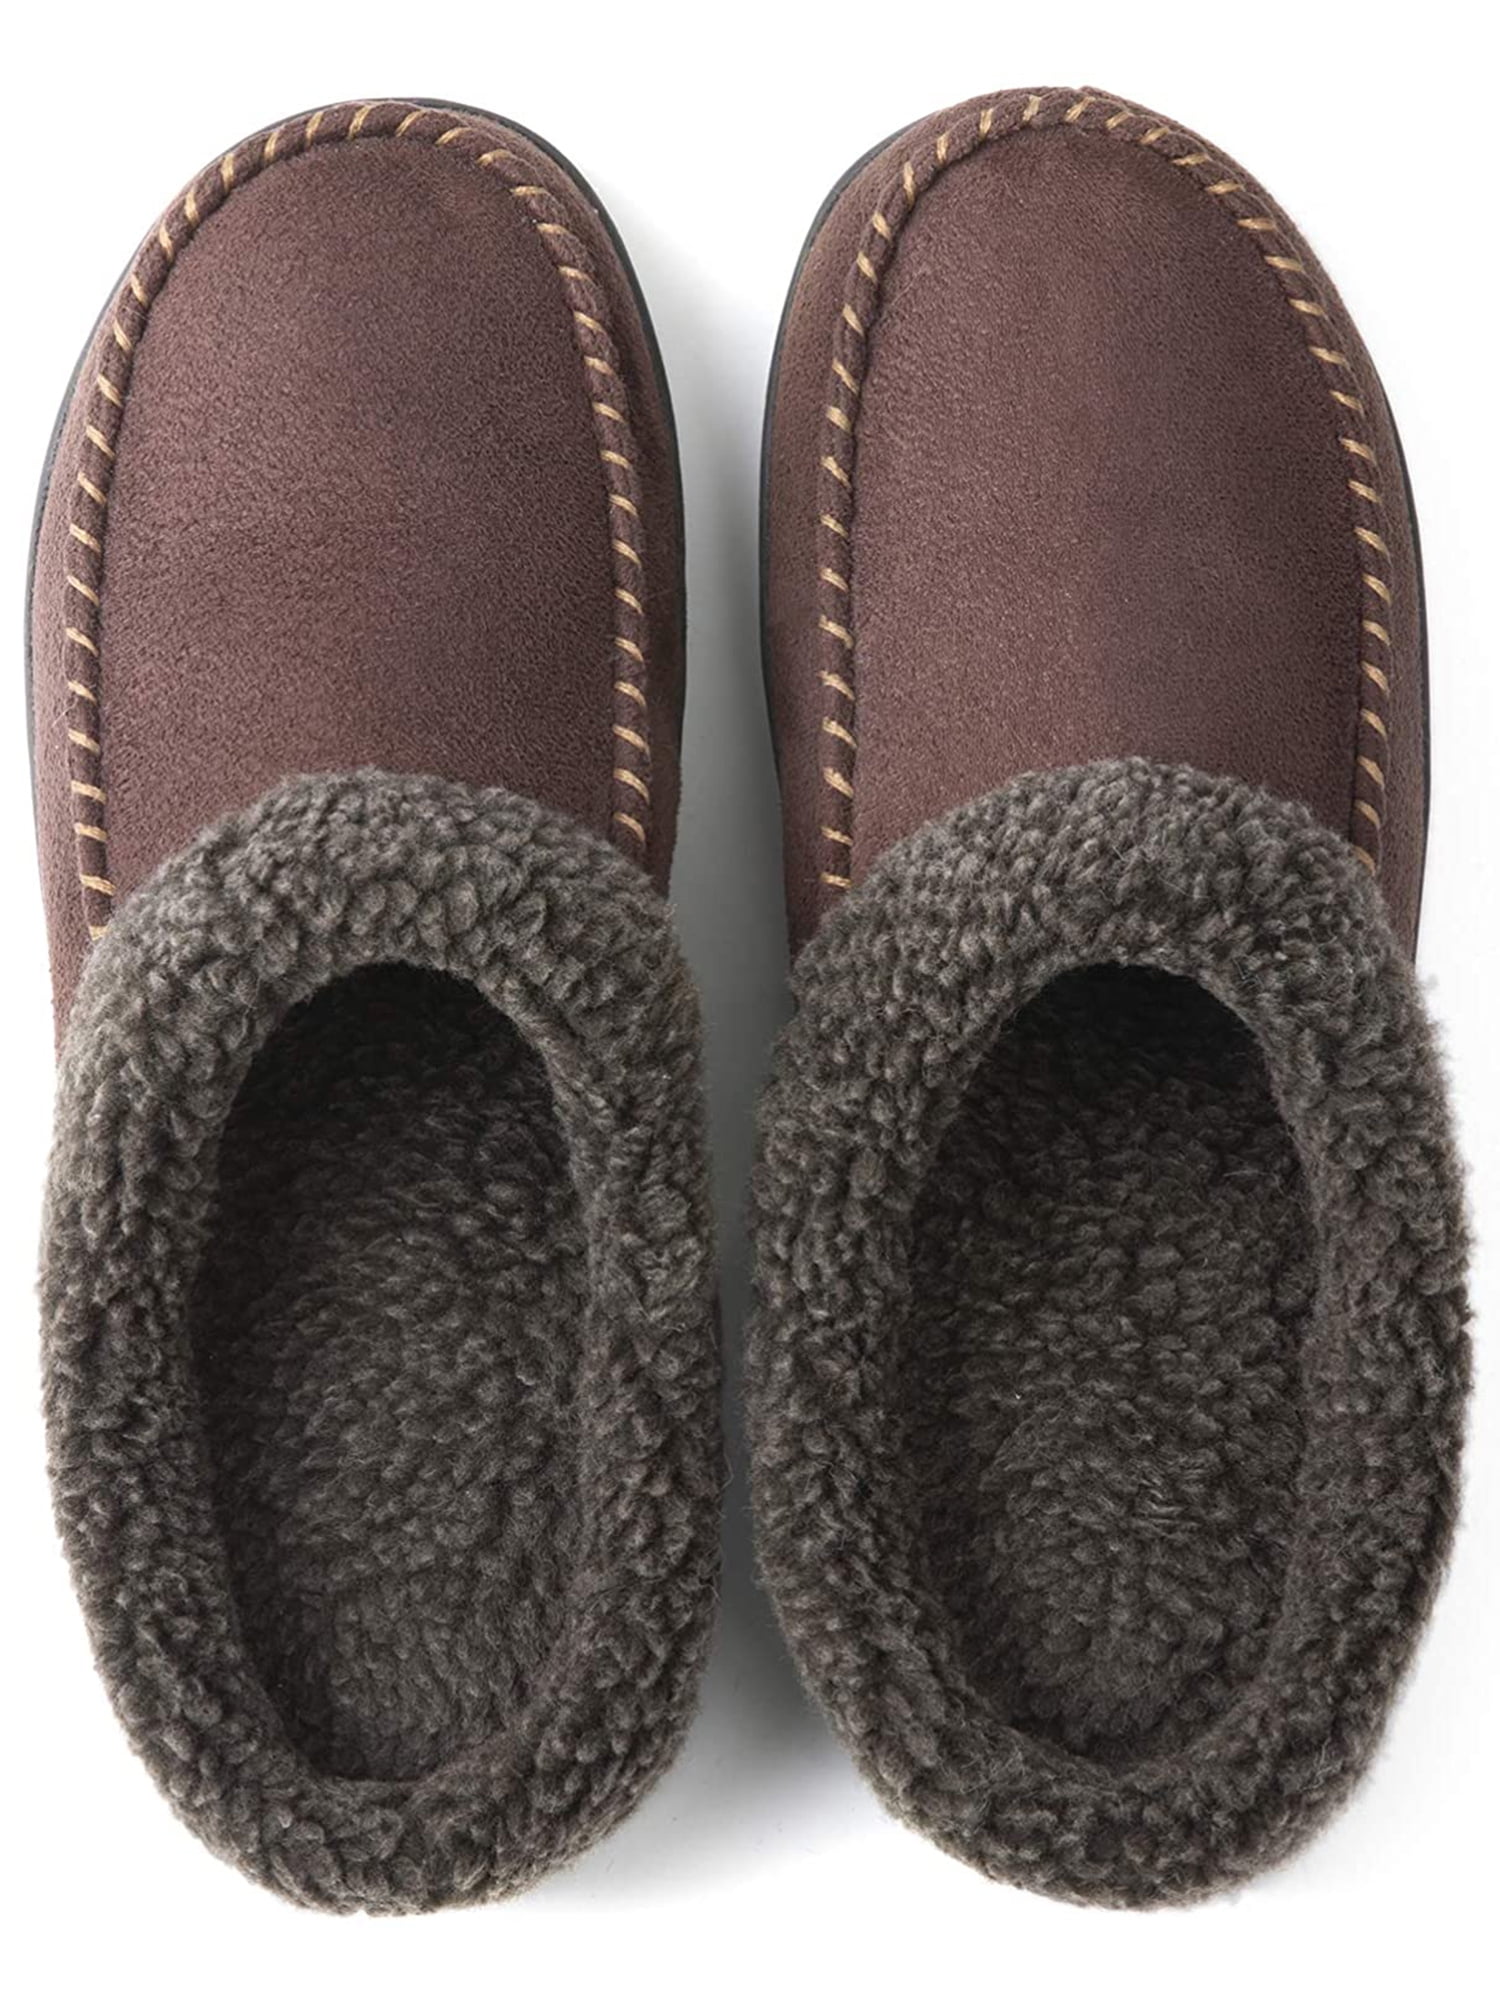 MENS NEW MOCCASIN WARM RUBBER SOLE PAADED COMFY SLIP ON FUR LINED SLIPPERS SIIZE 